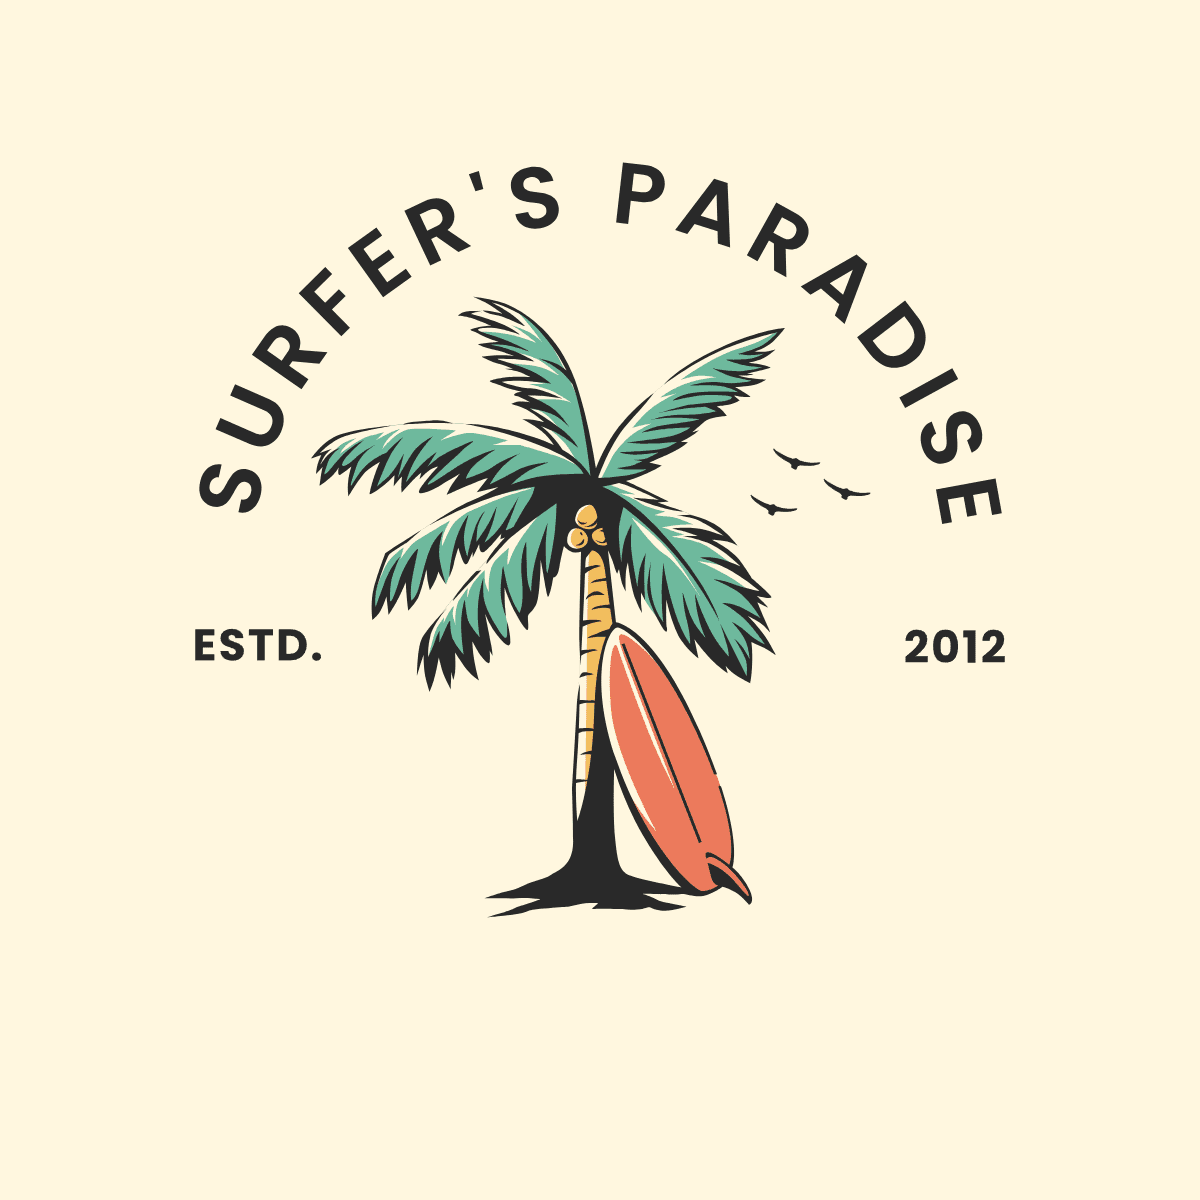 A surfer 's paradise logo with palm tree and surfboard.